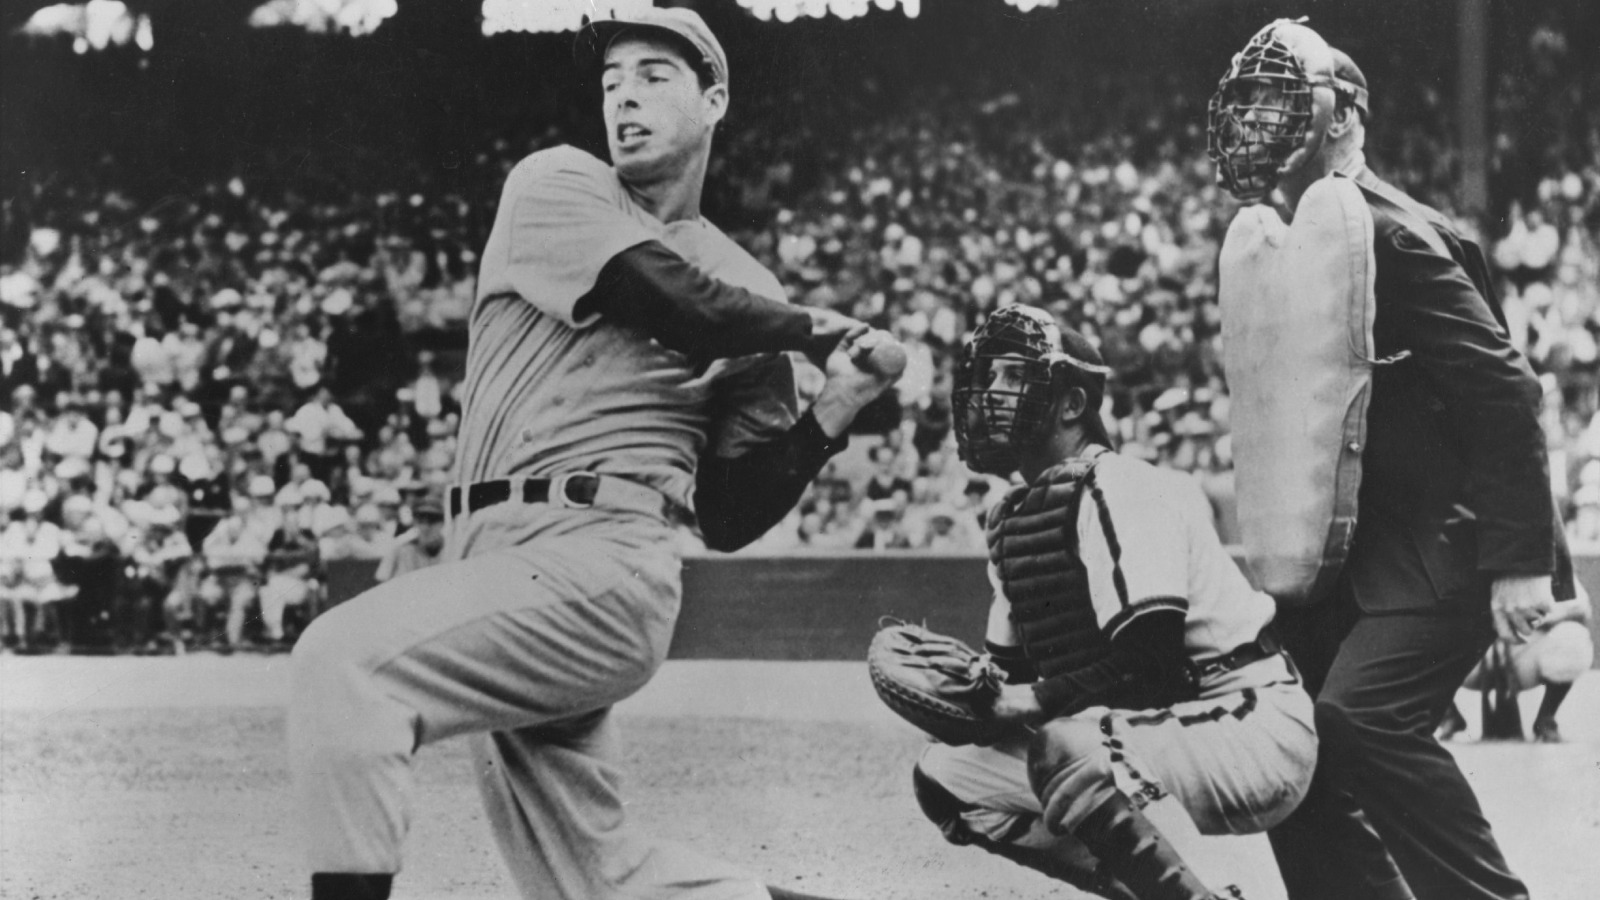 DiMaggio's Death and Will, American Experience, Official Site